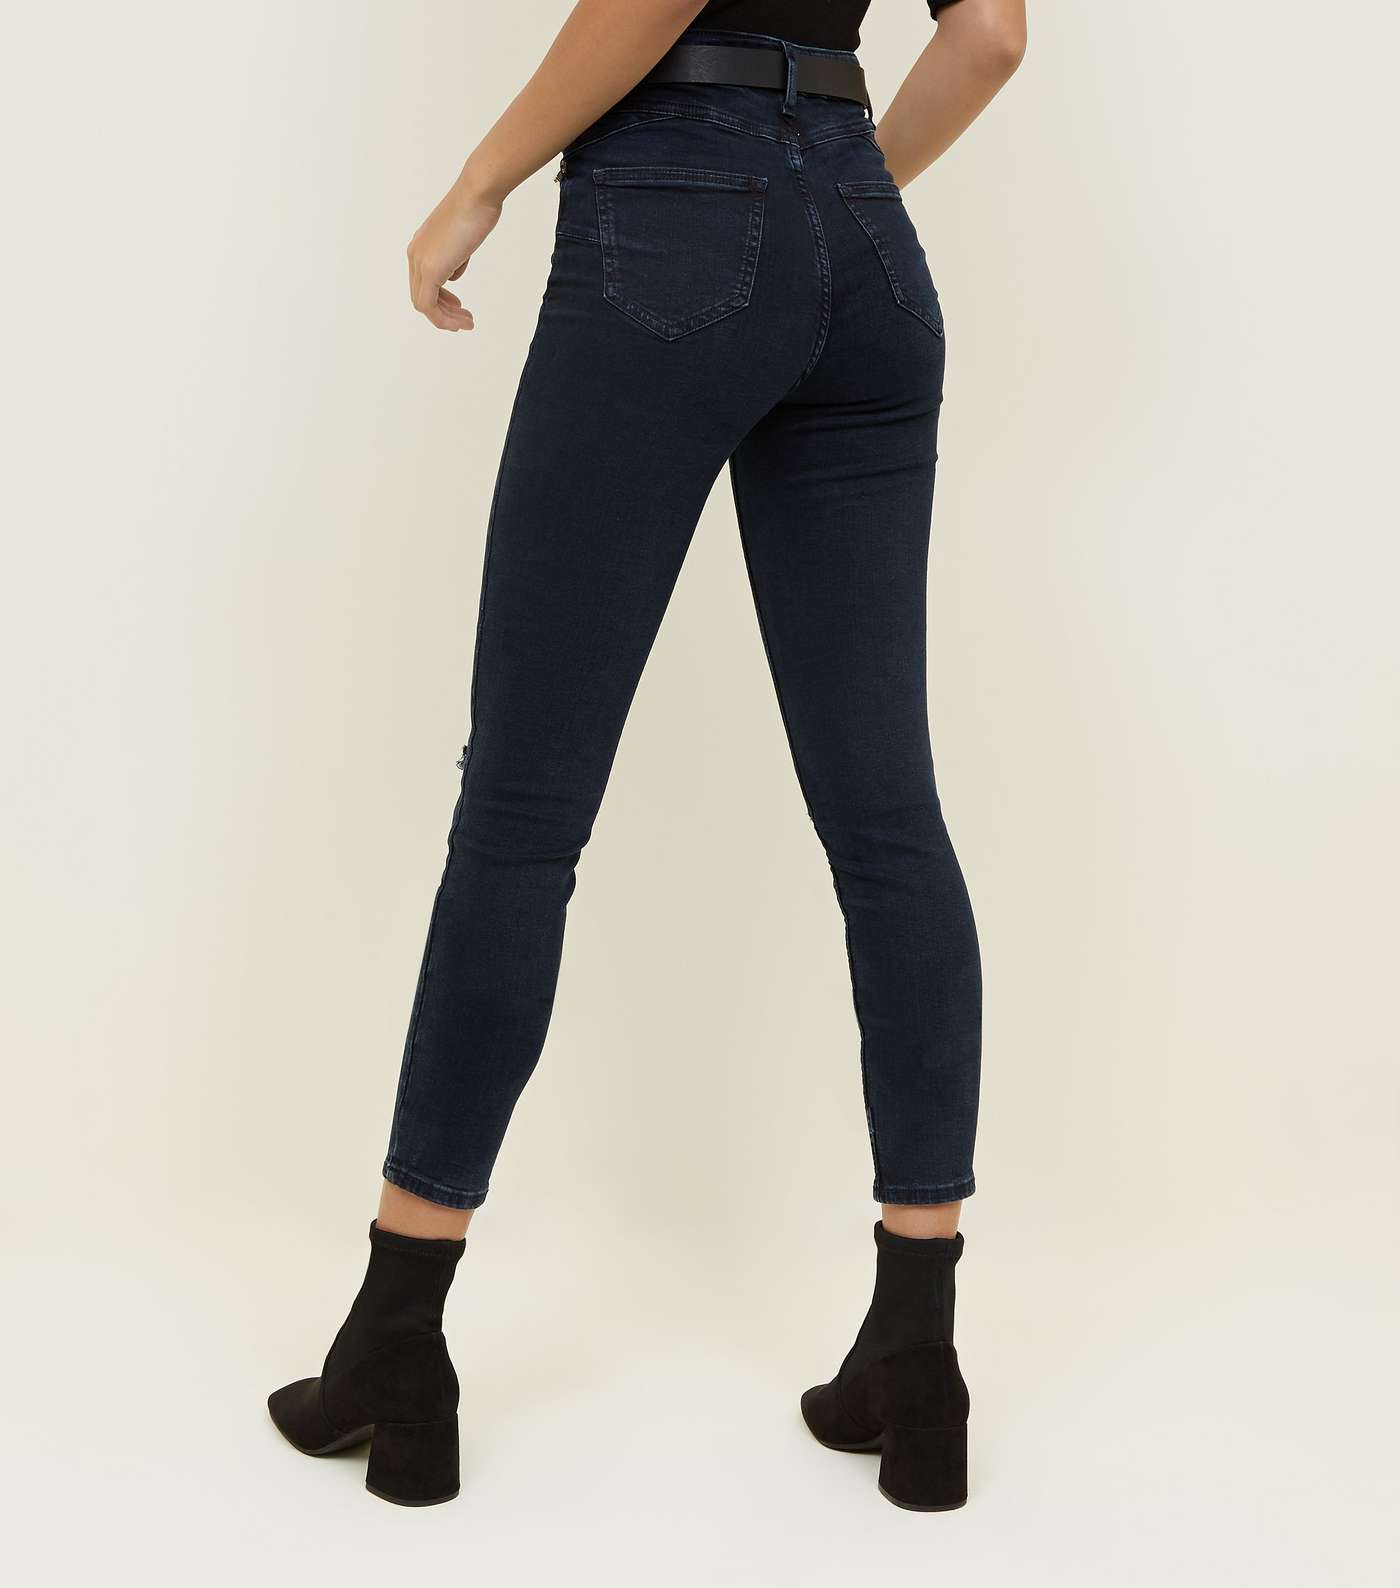 Navy Ripped Super Skinny 'Lift & Shape' Jeans Image 3